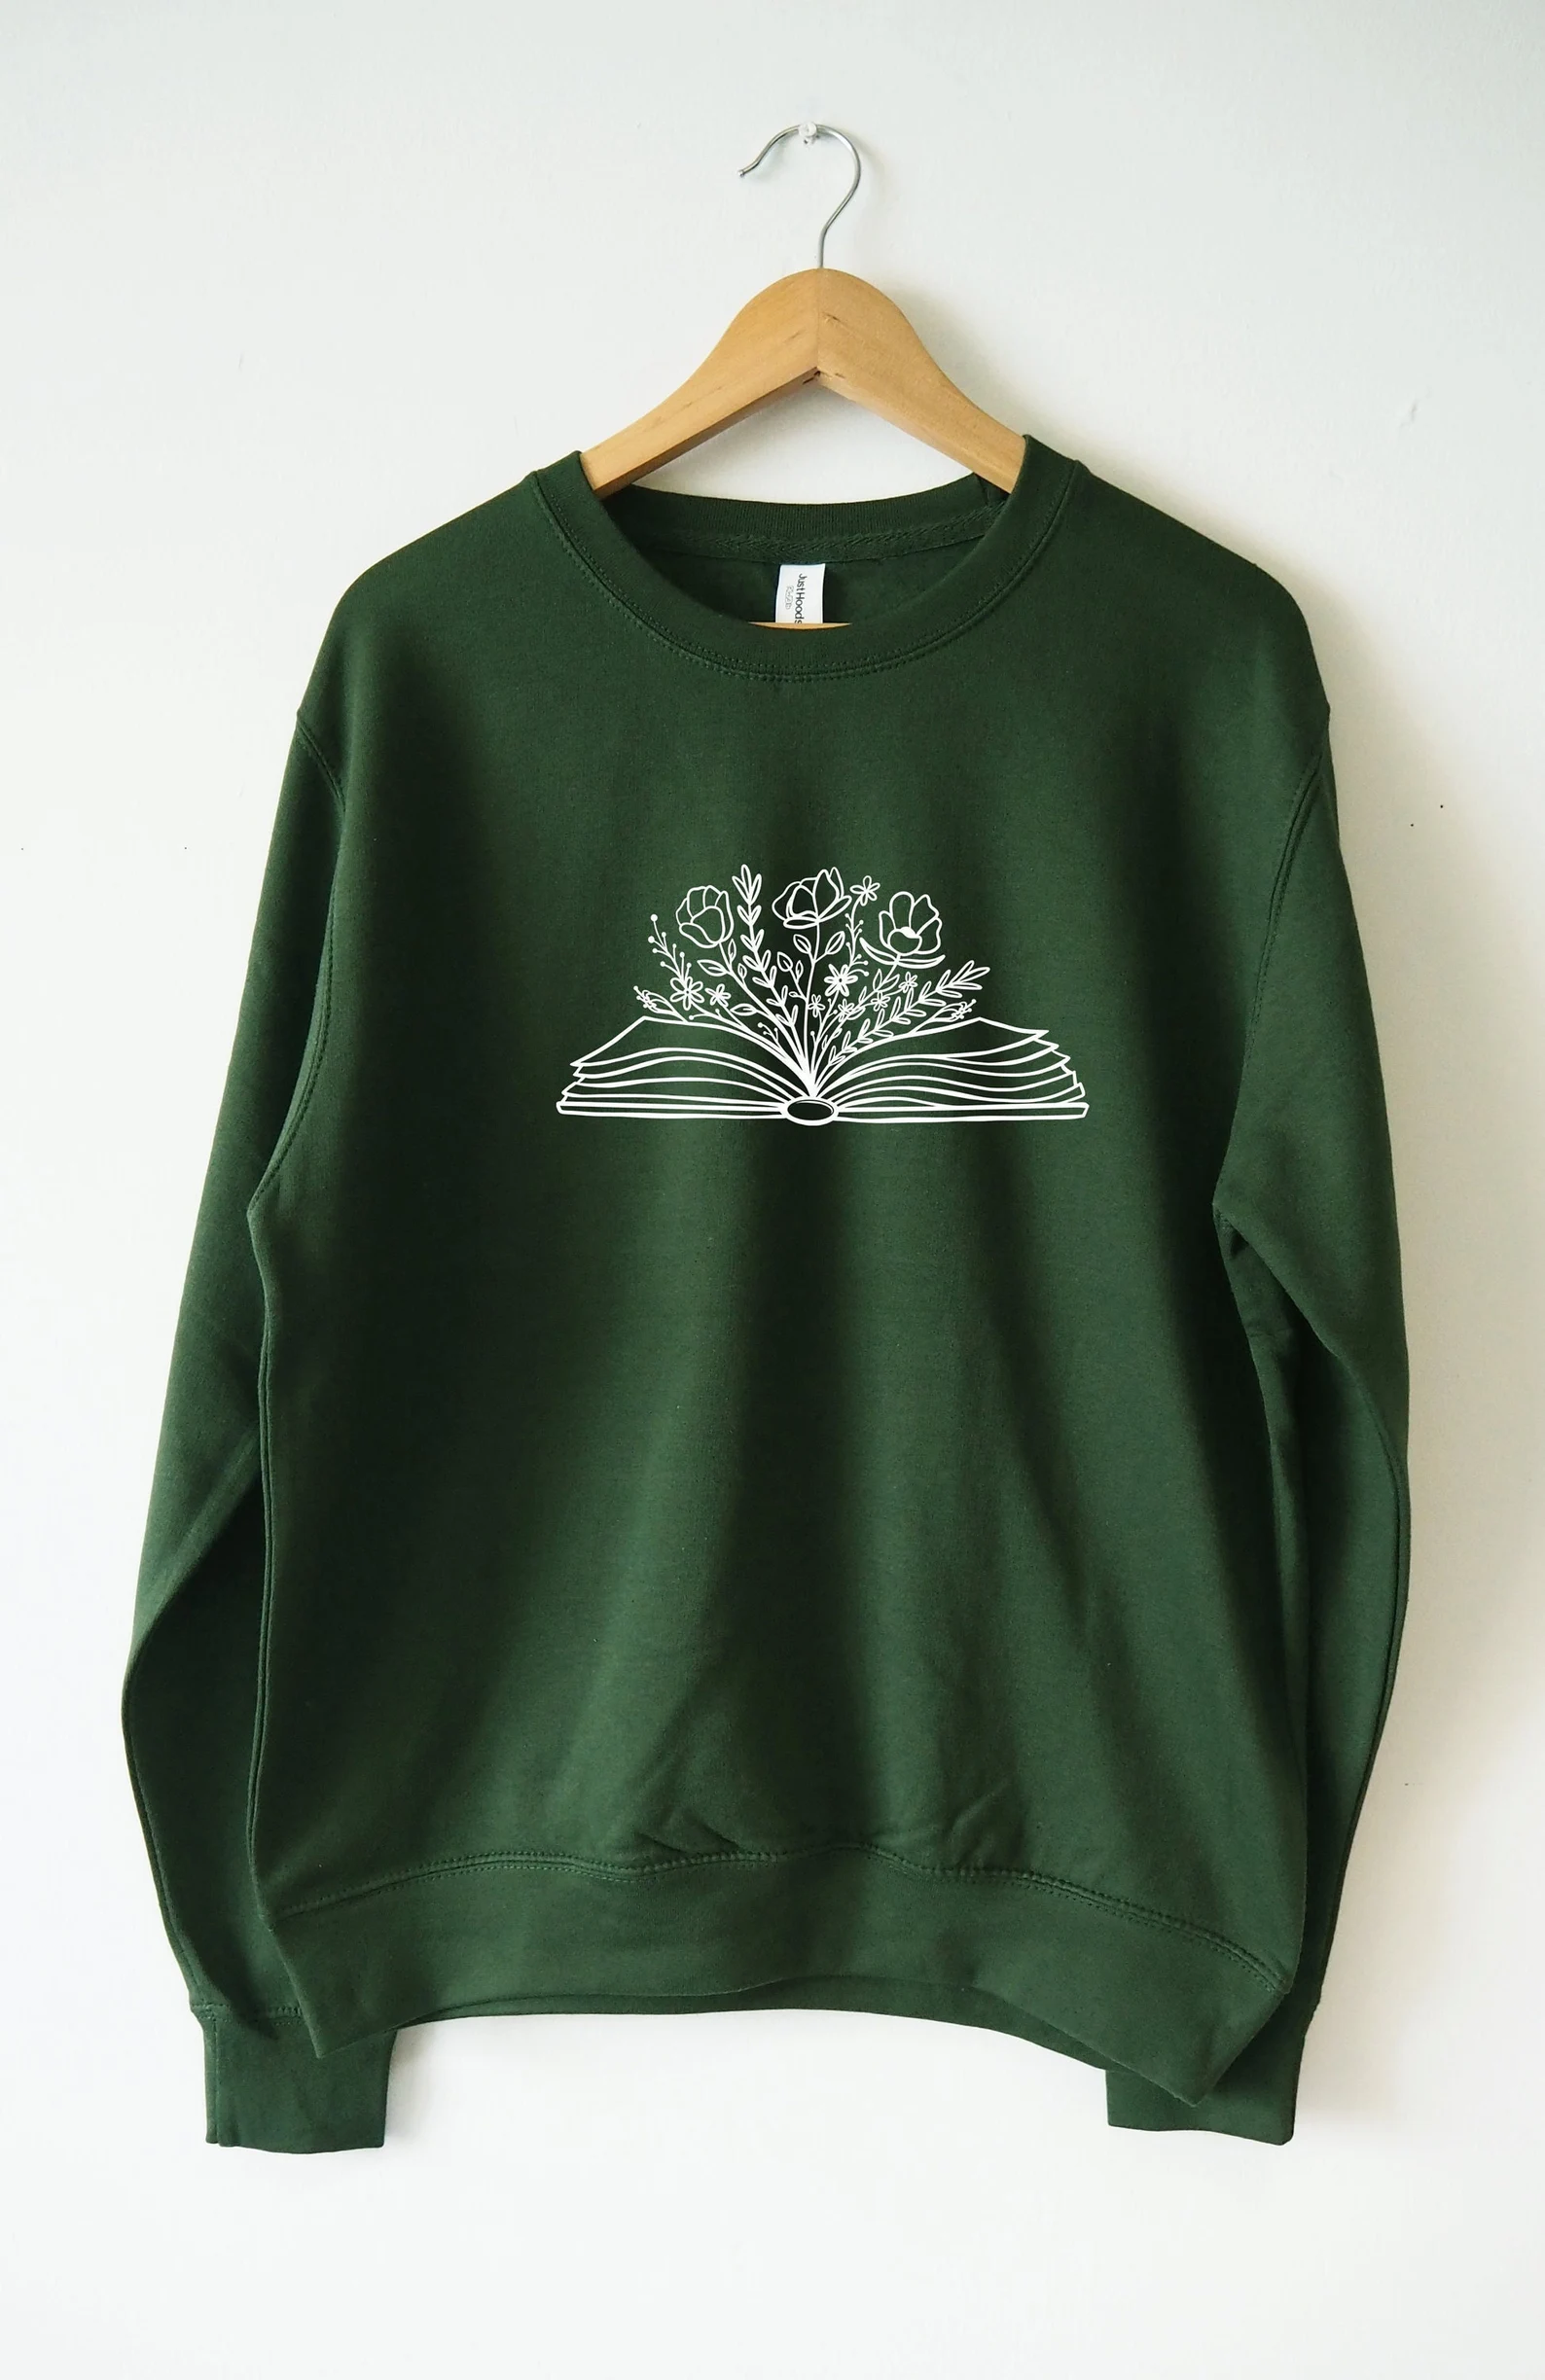 A long-sleeved green shirt printed with a small illustration of an open book overflowing with flowers.